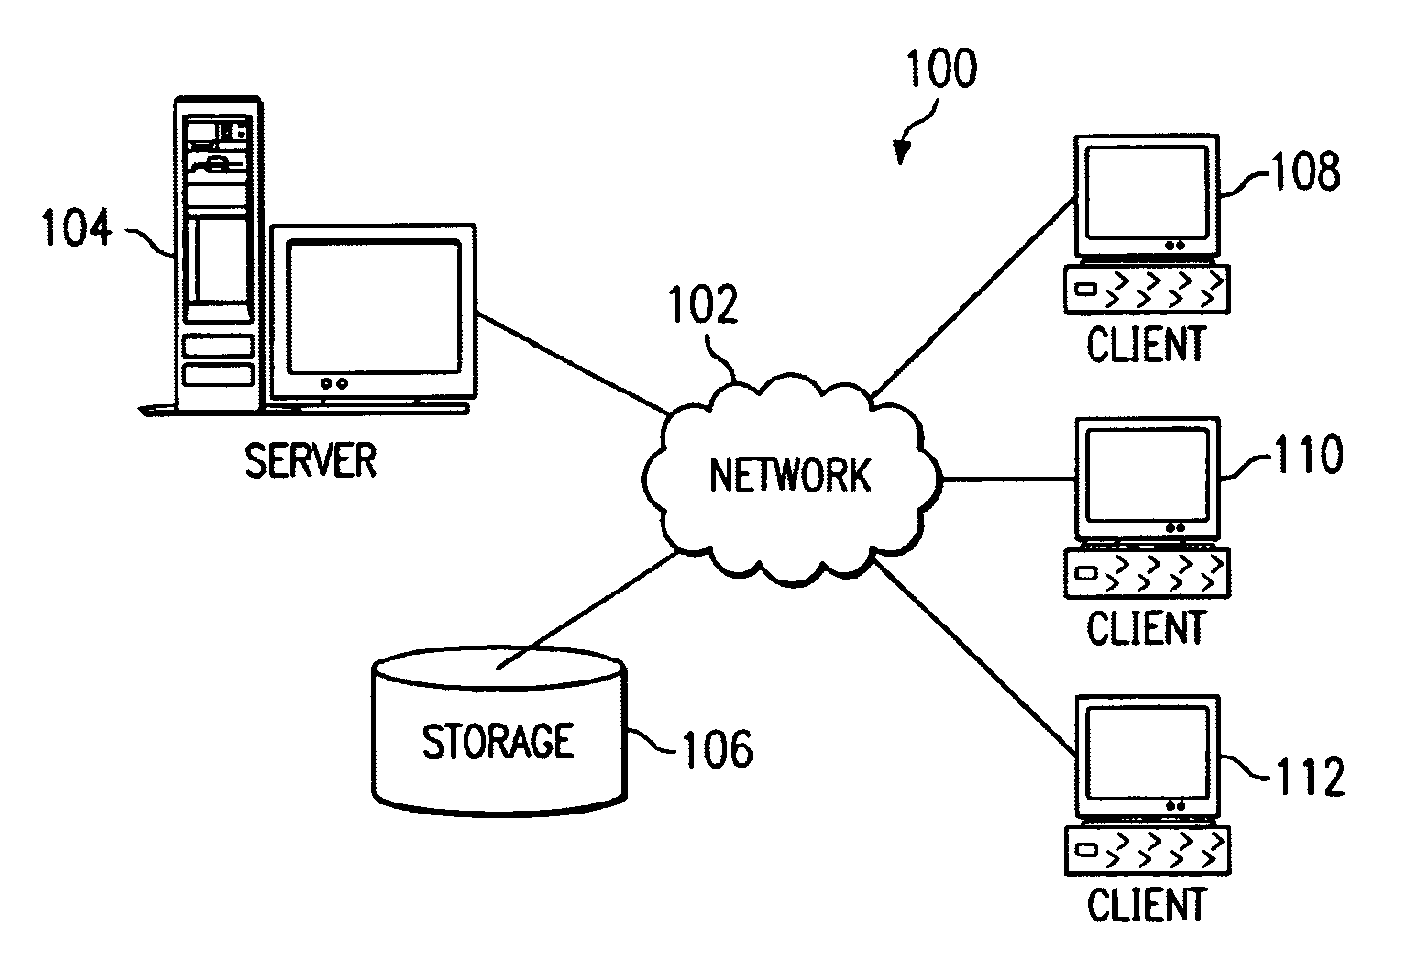 Method and apparatus for the automatic migration of applications and their associated data and configuration files